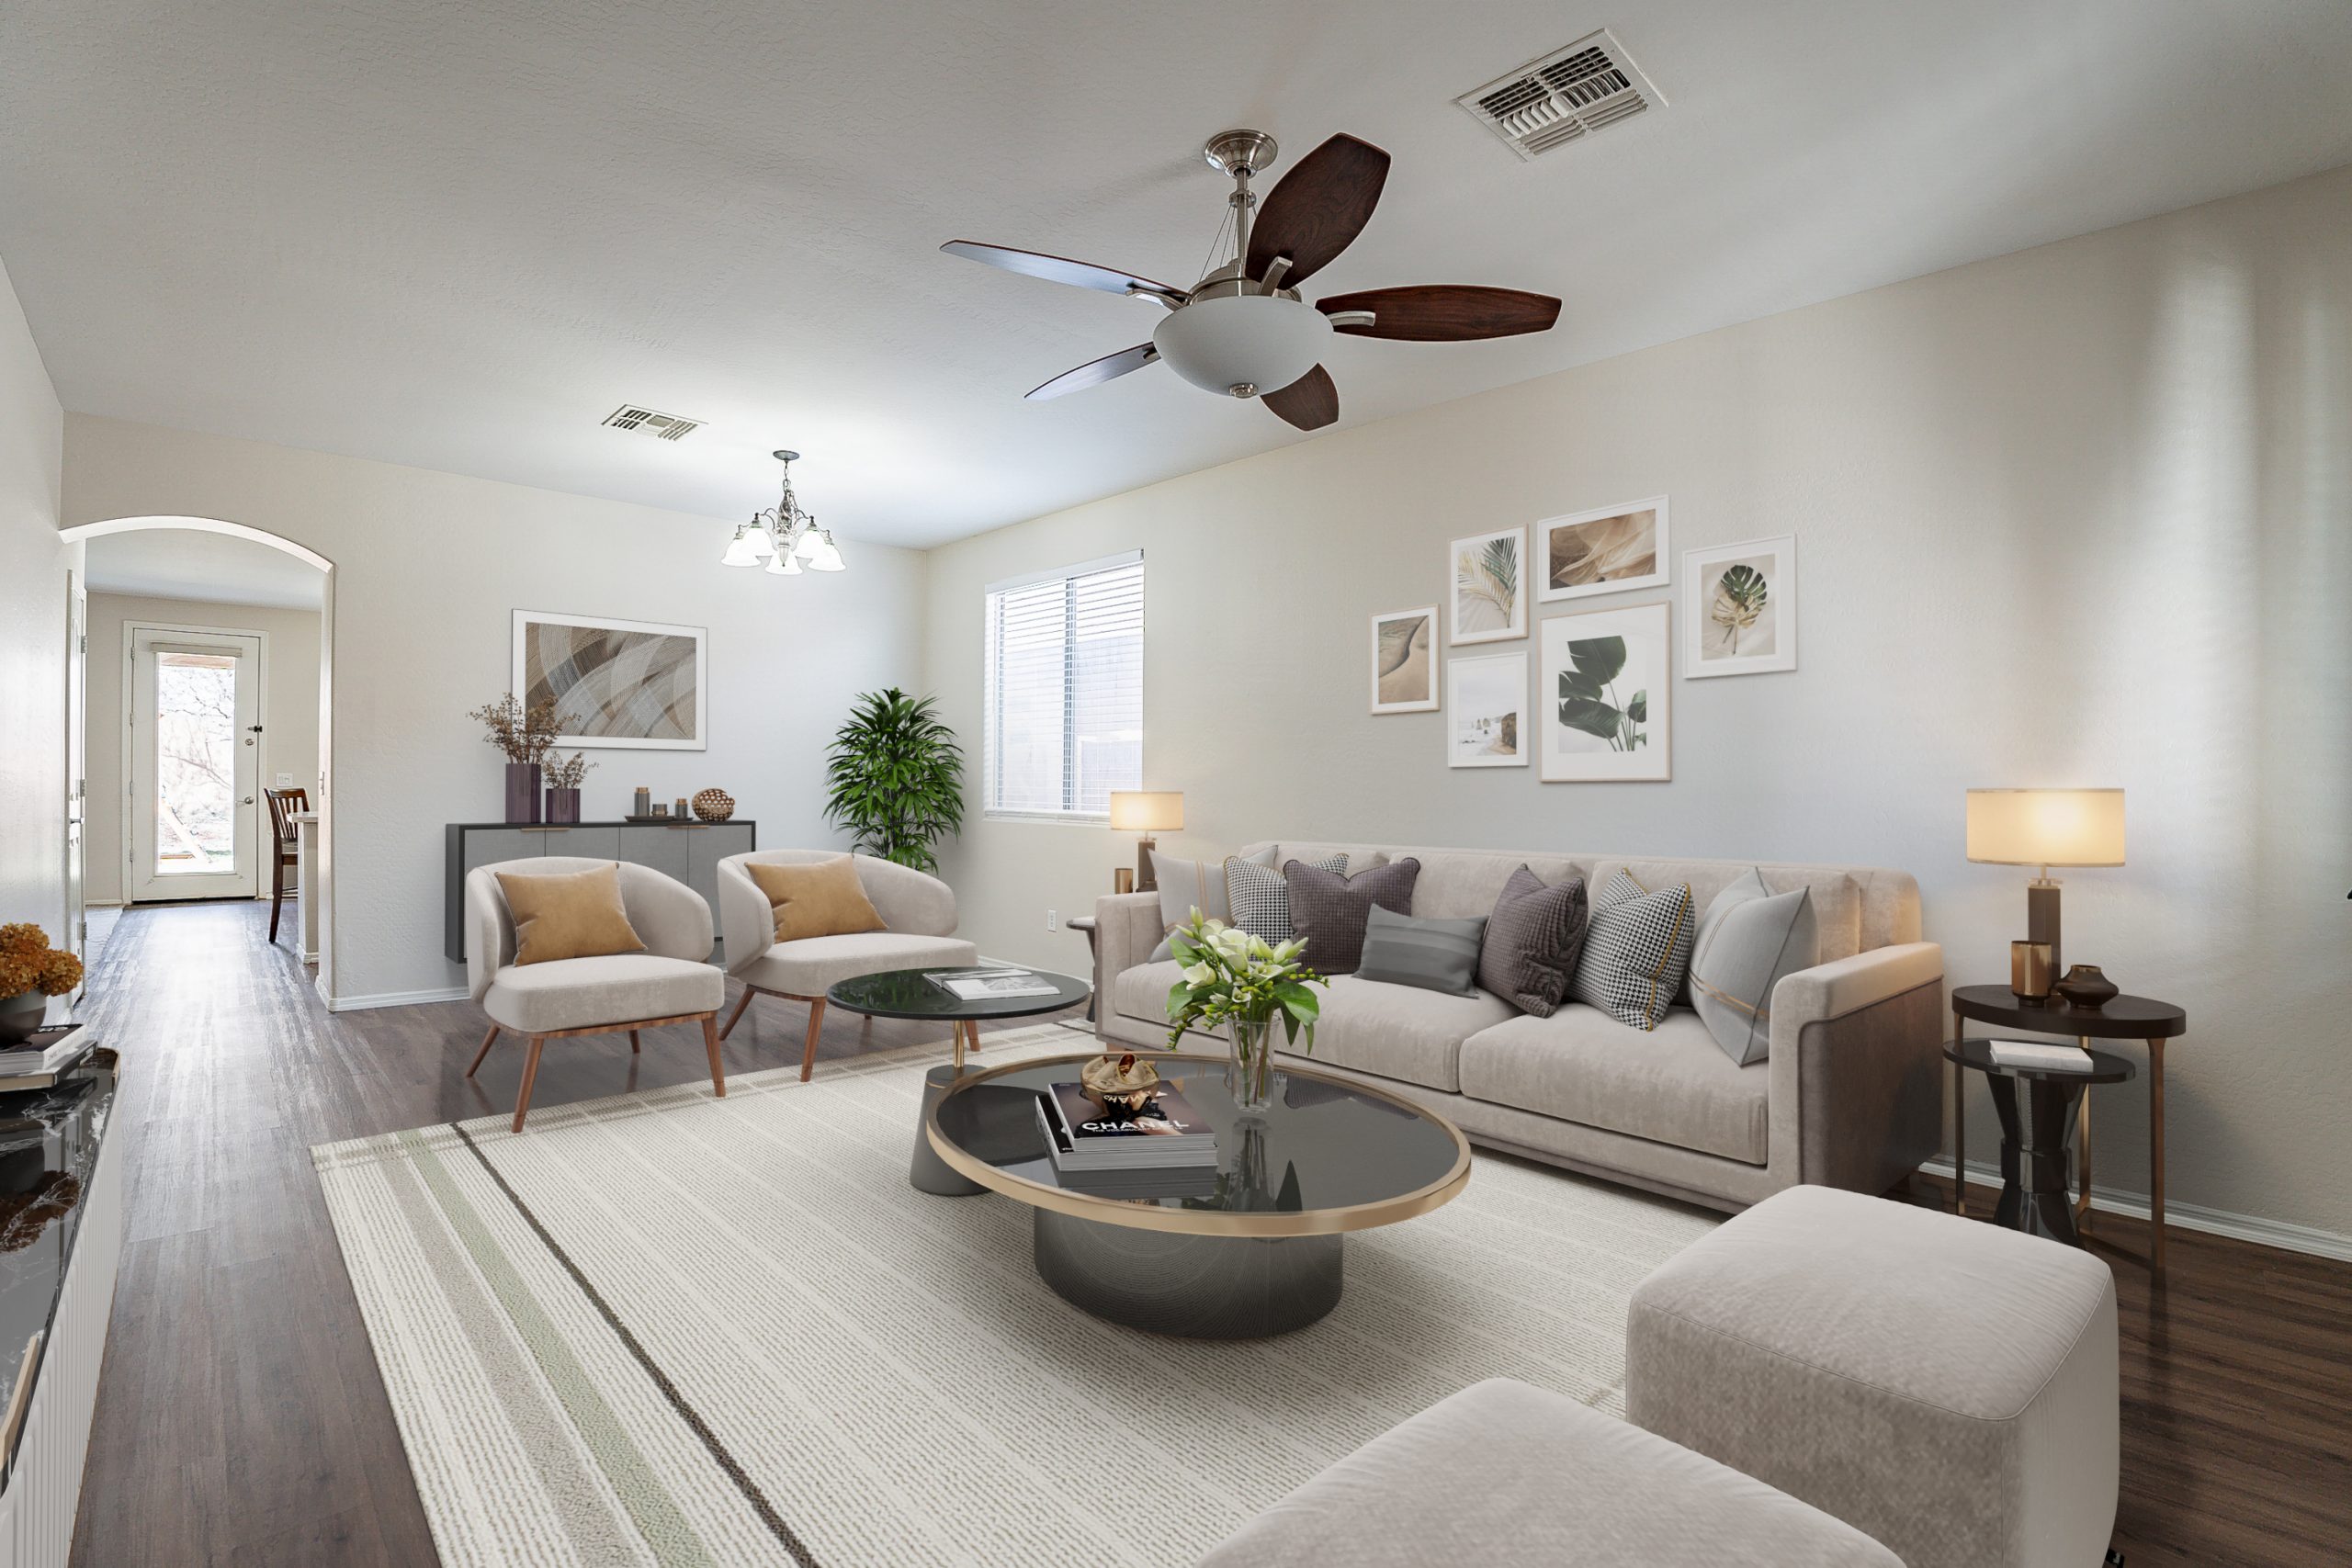 Andrew Piane Peoria, AZ sold home showing the living room decorated with white couches and bright open floor plan lighting